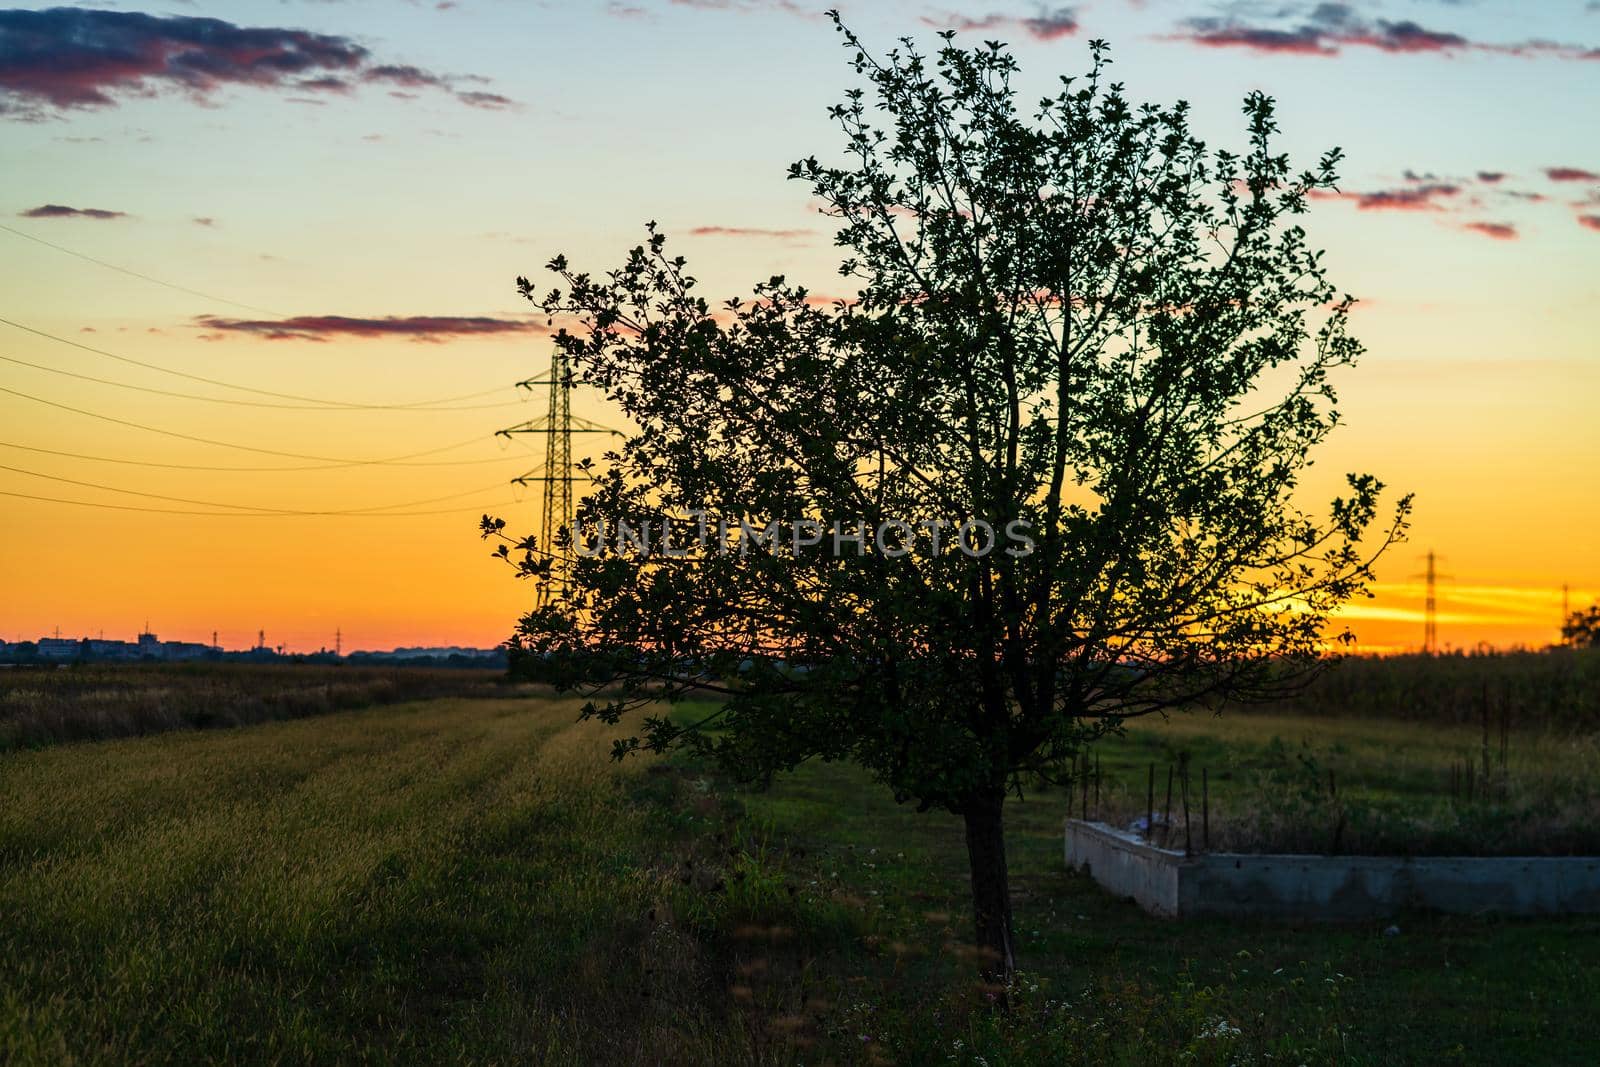 Tree in the orchard at sunset. Countryside sunset